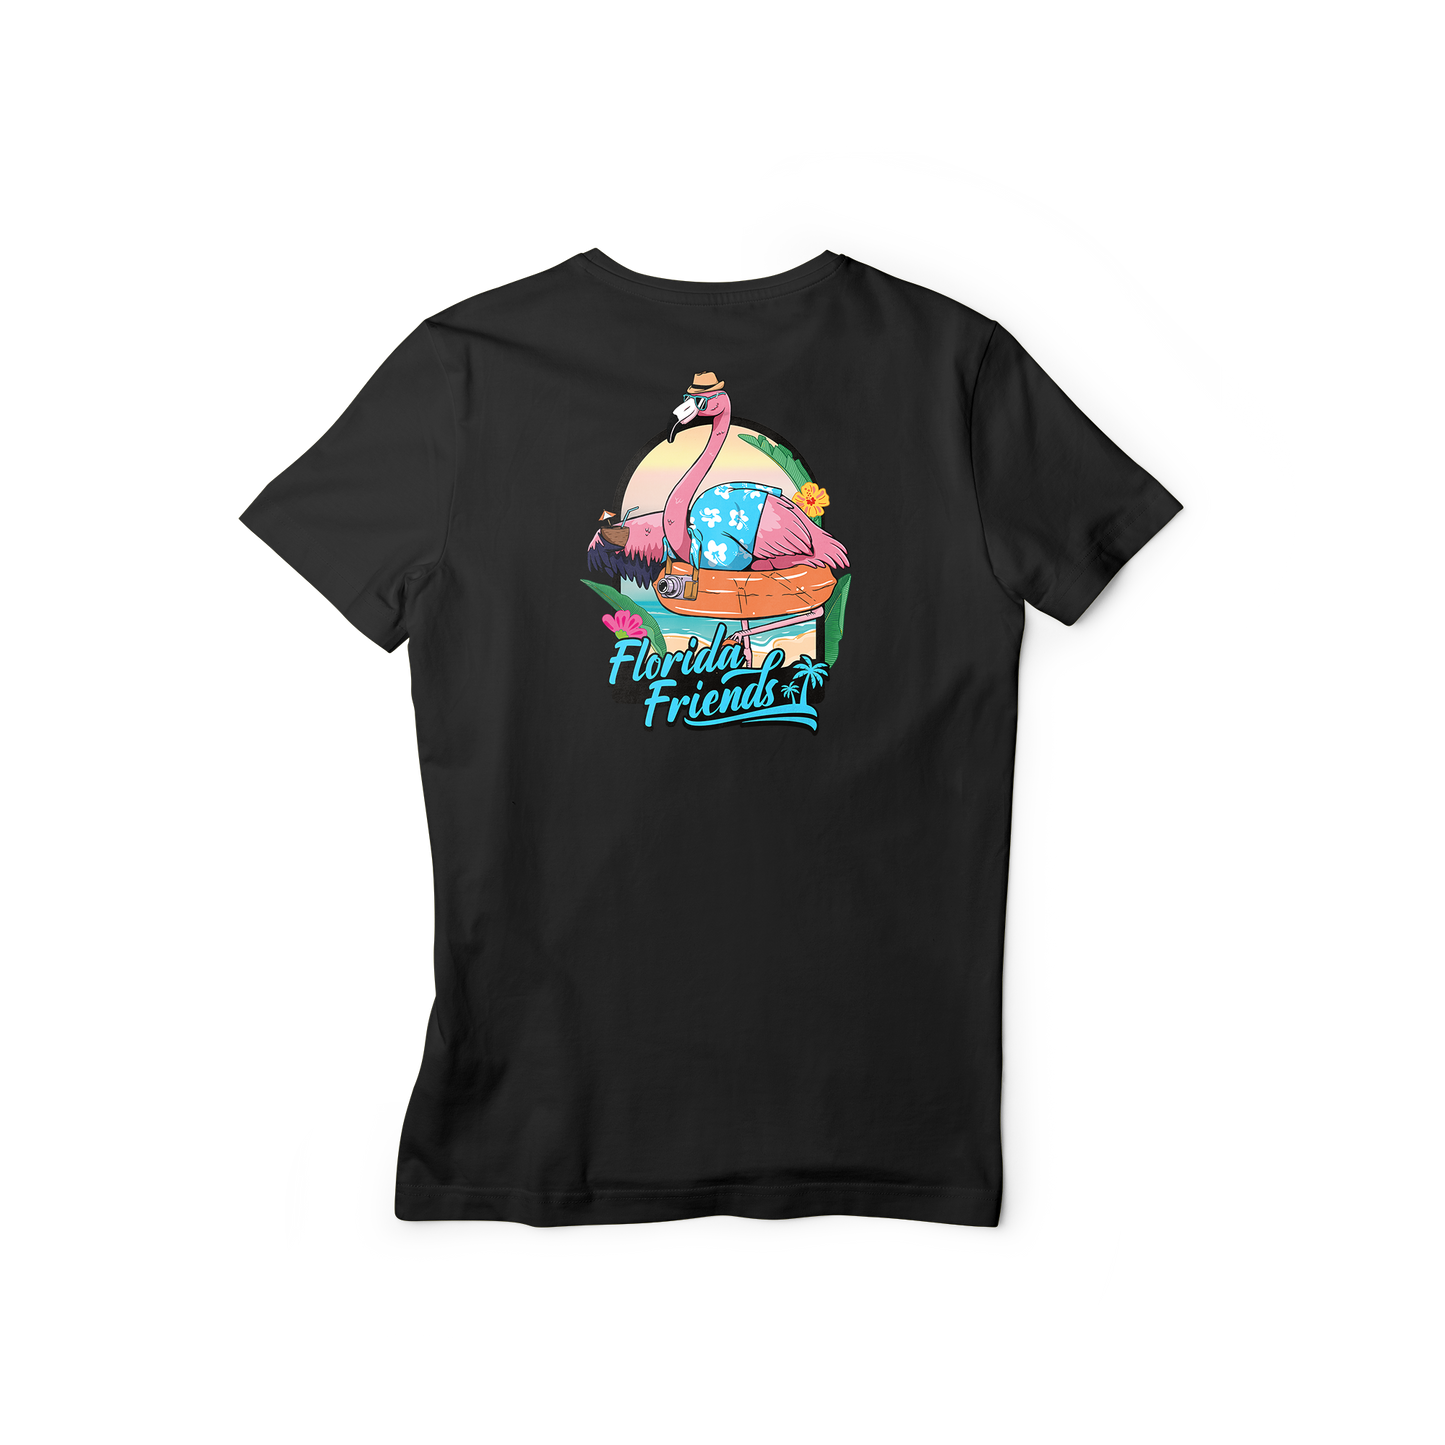 Kids Florence Graphic T-Shirt